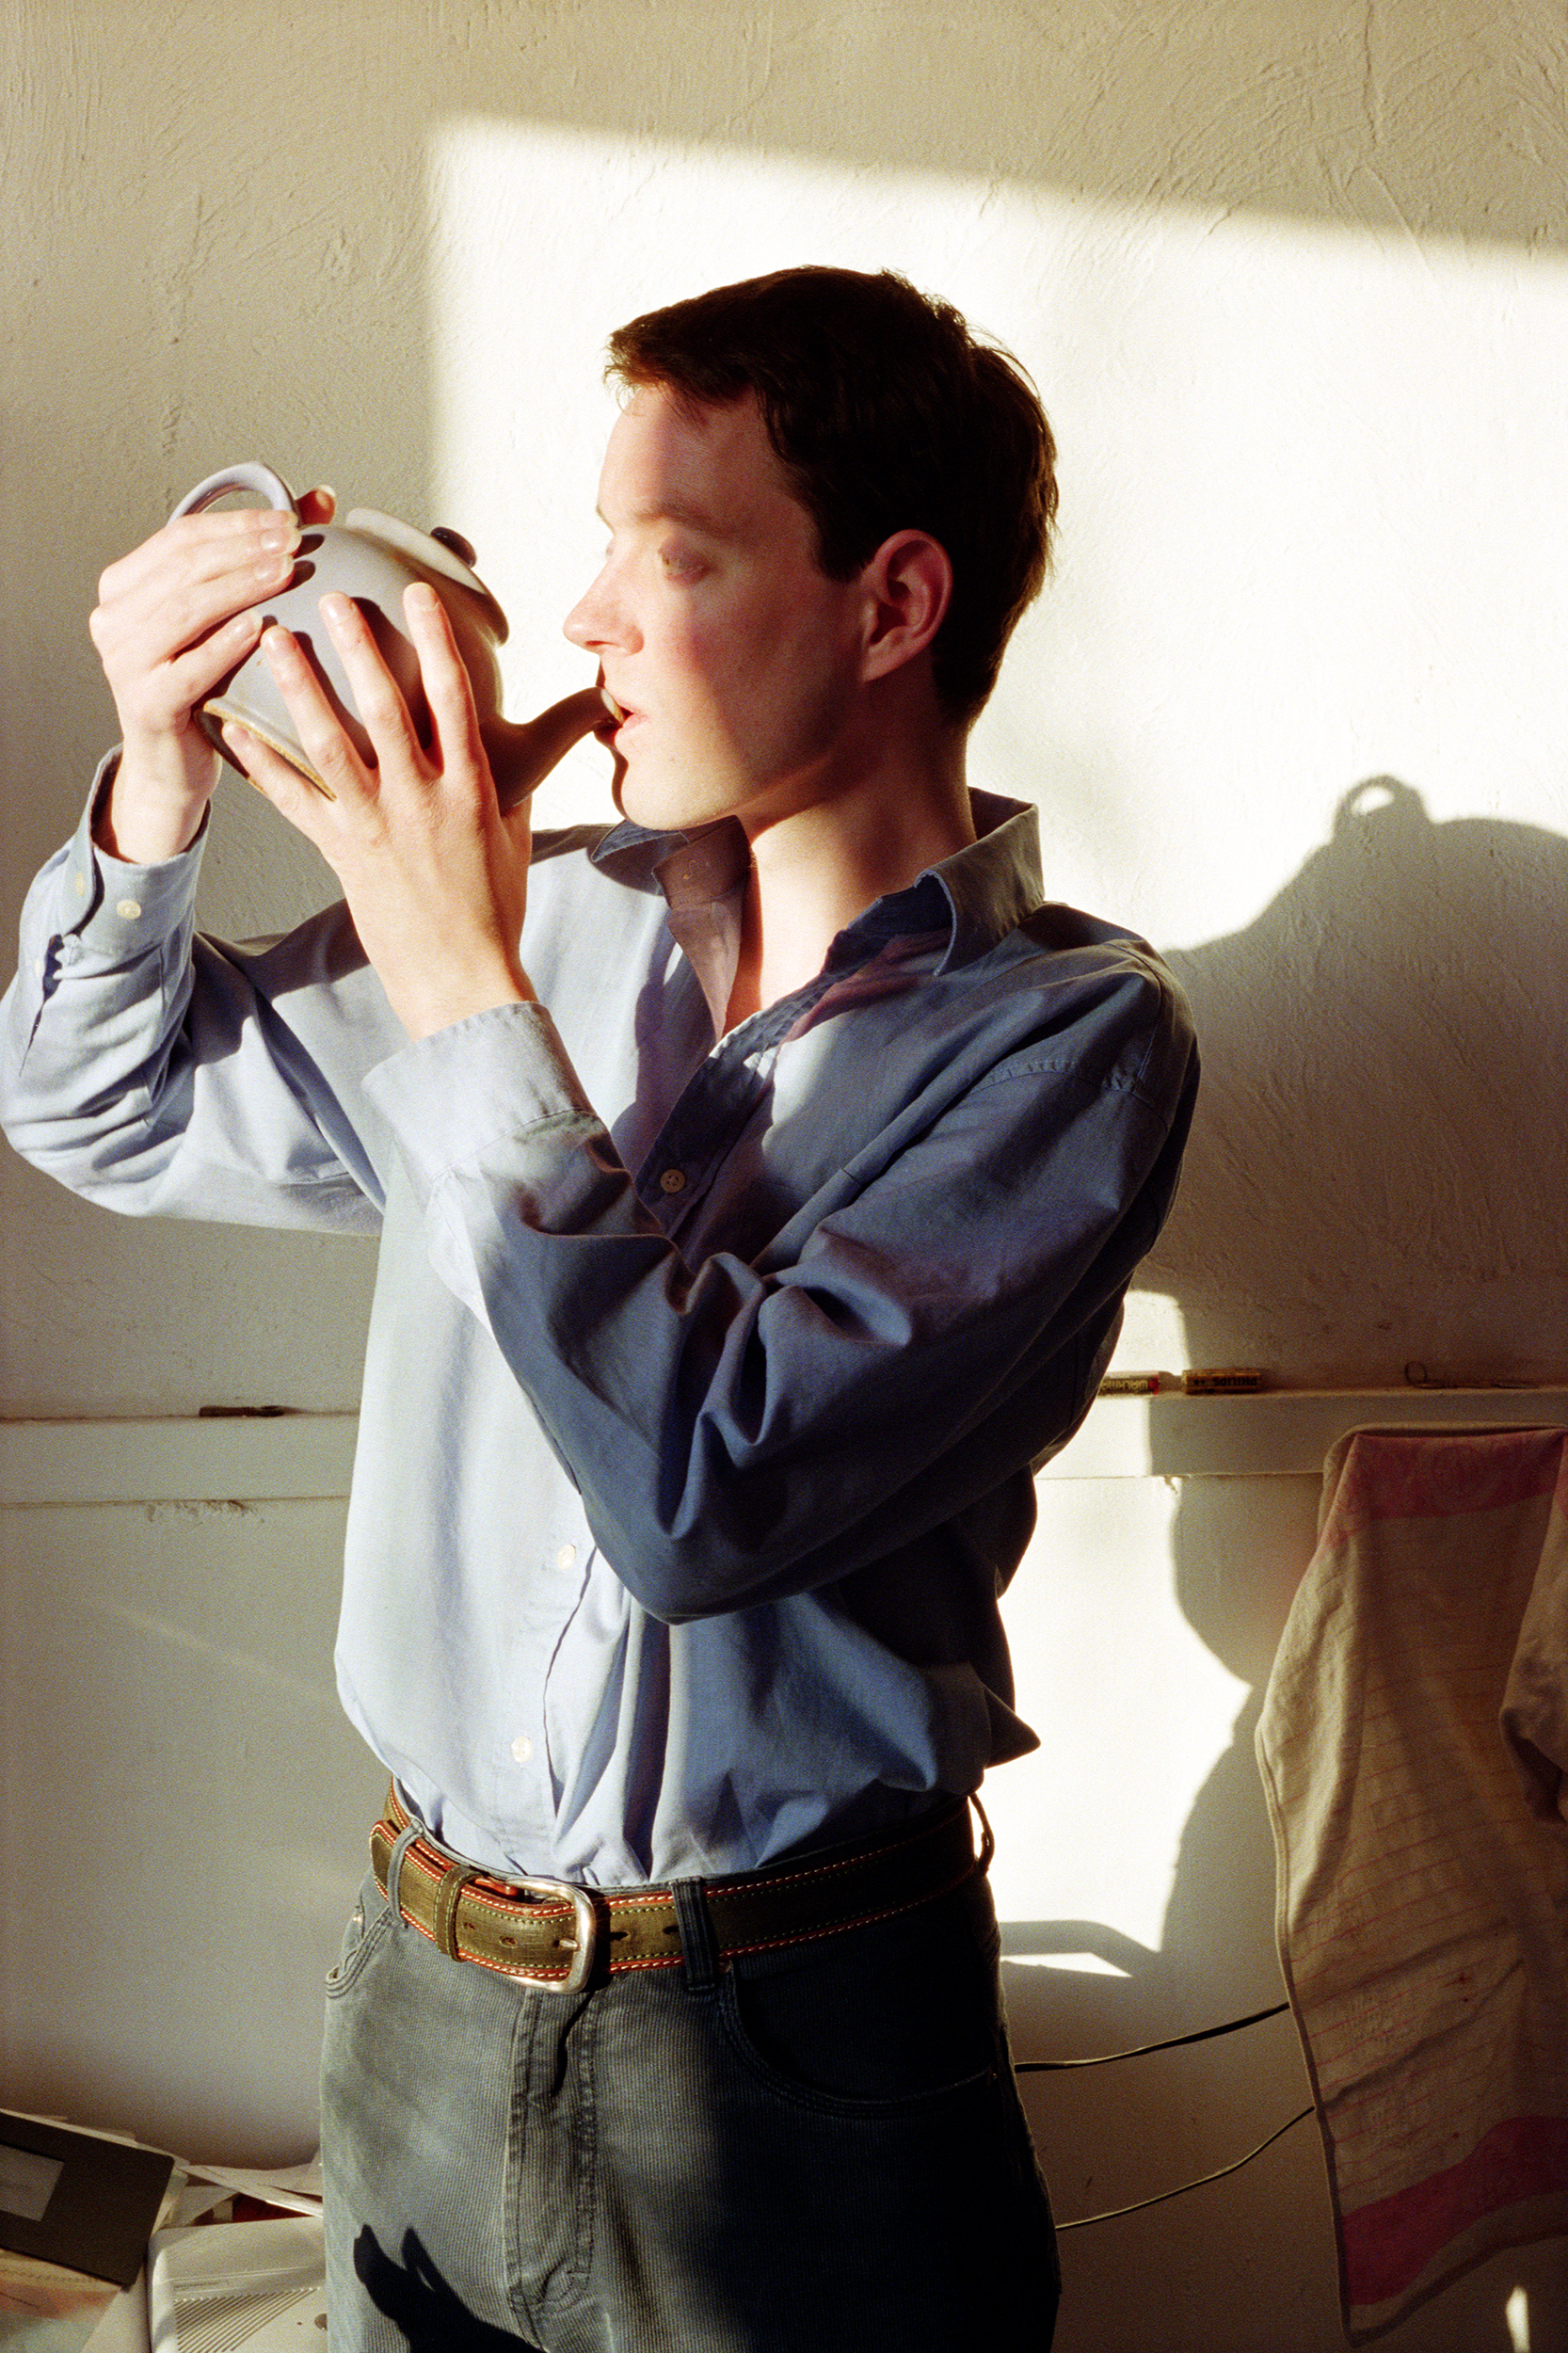 Self-portrait with Teapot, photograph by Wouter van Riessen